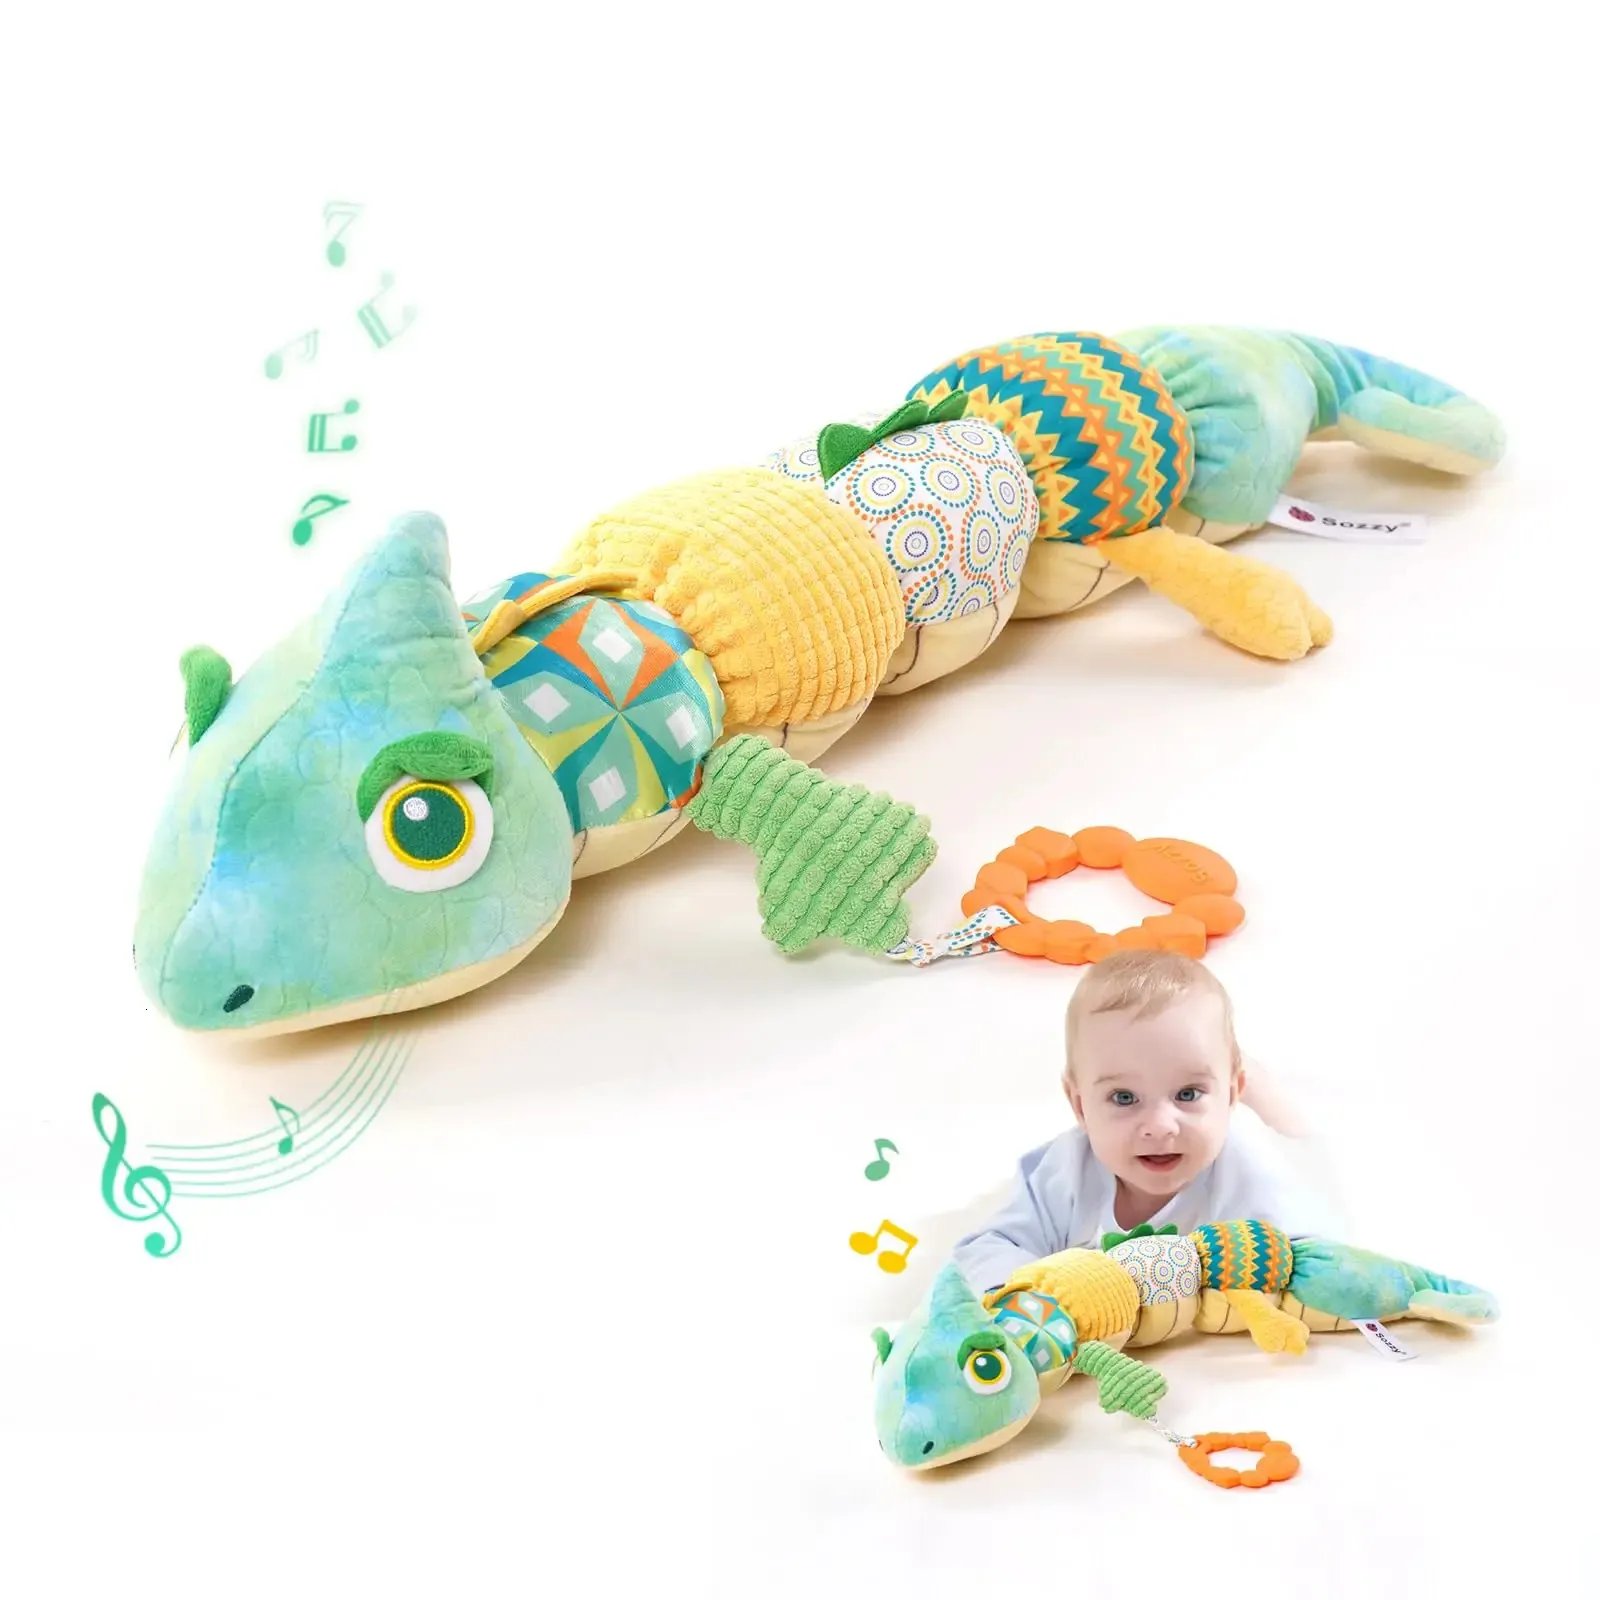 Chameleo Infant Toys Baby Musical Stuffed Animal Toys with Rattles Crinkle BellBaby Teething Toys for Tummy Time born Sensory 231225